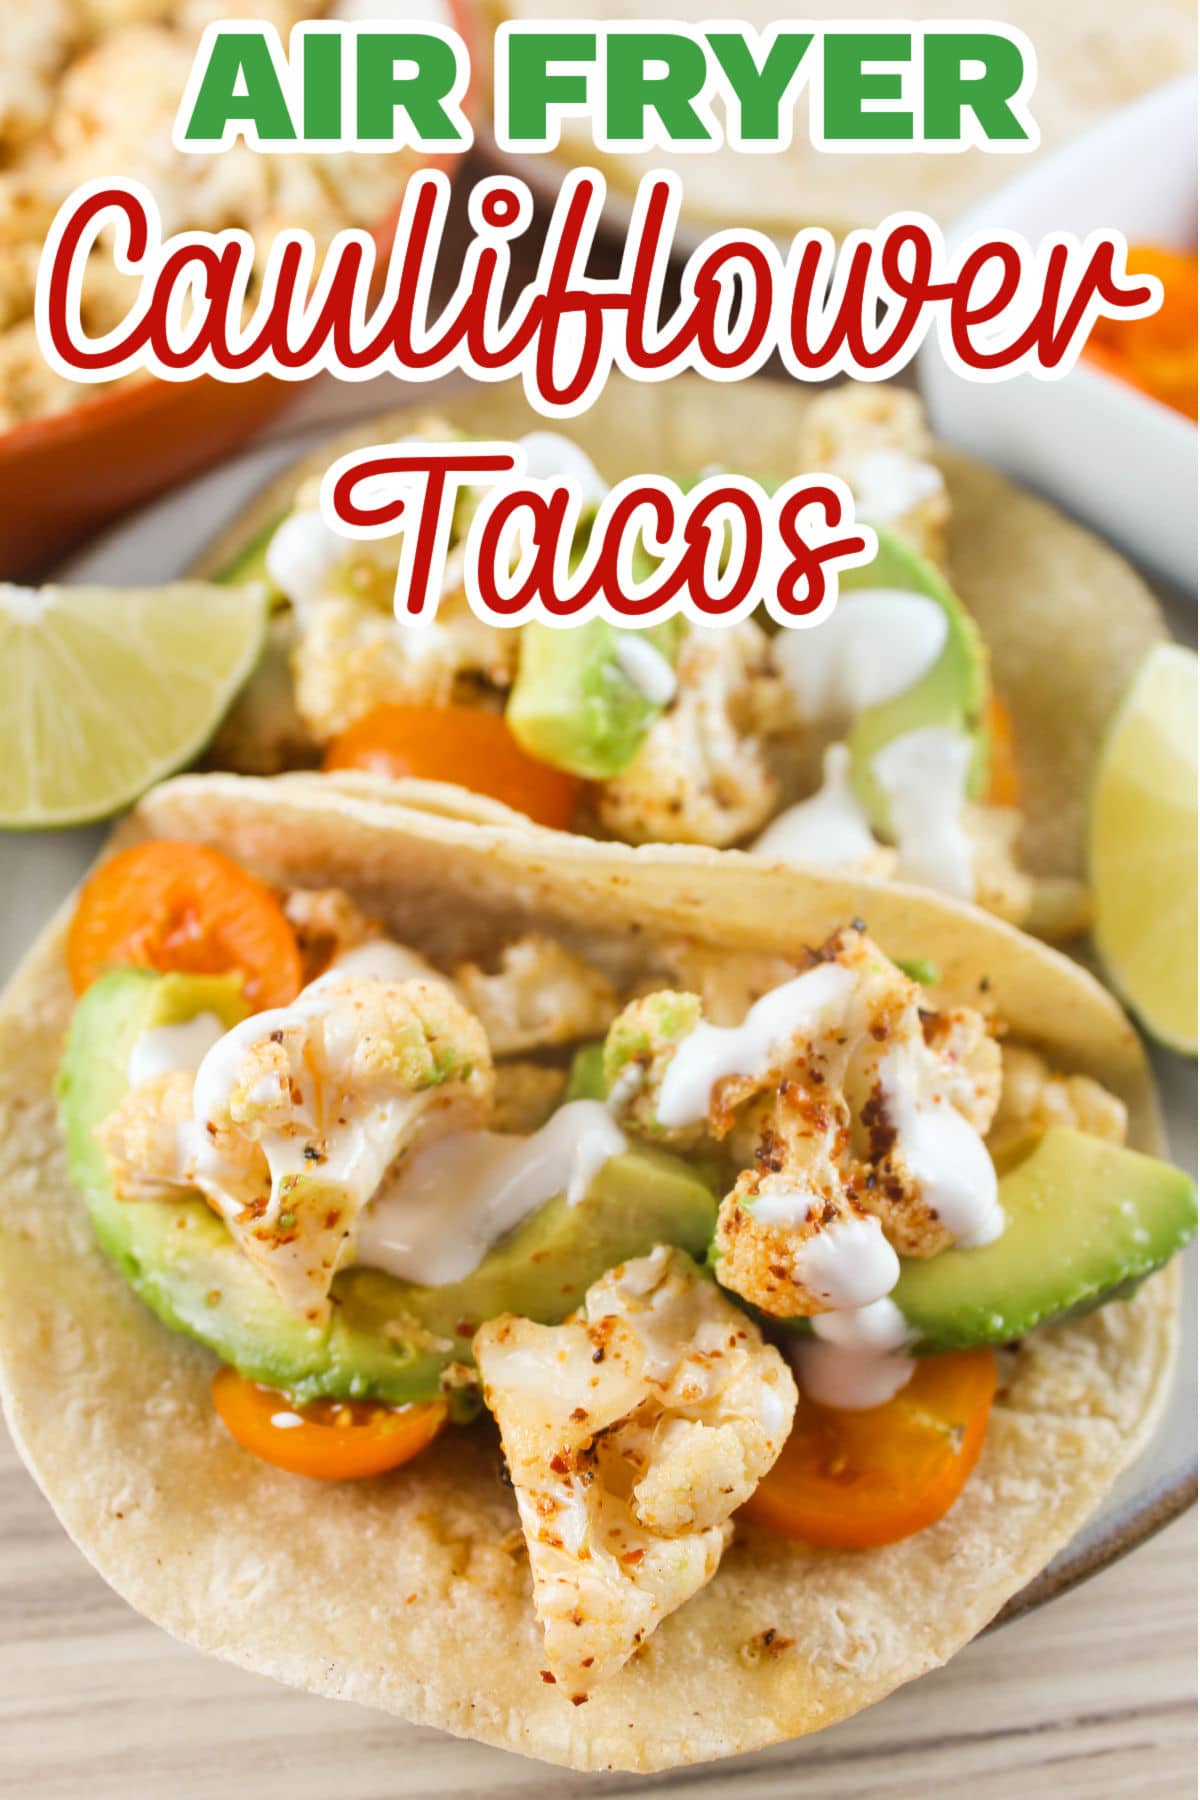 Air Fryer Cauliflower Tacos have become my go-to meal during the week! They're ready in 15 minutes and delicious when topped with fajita seasoning, cherry tomatoes and my lime crema!  via @foodhussy